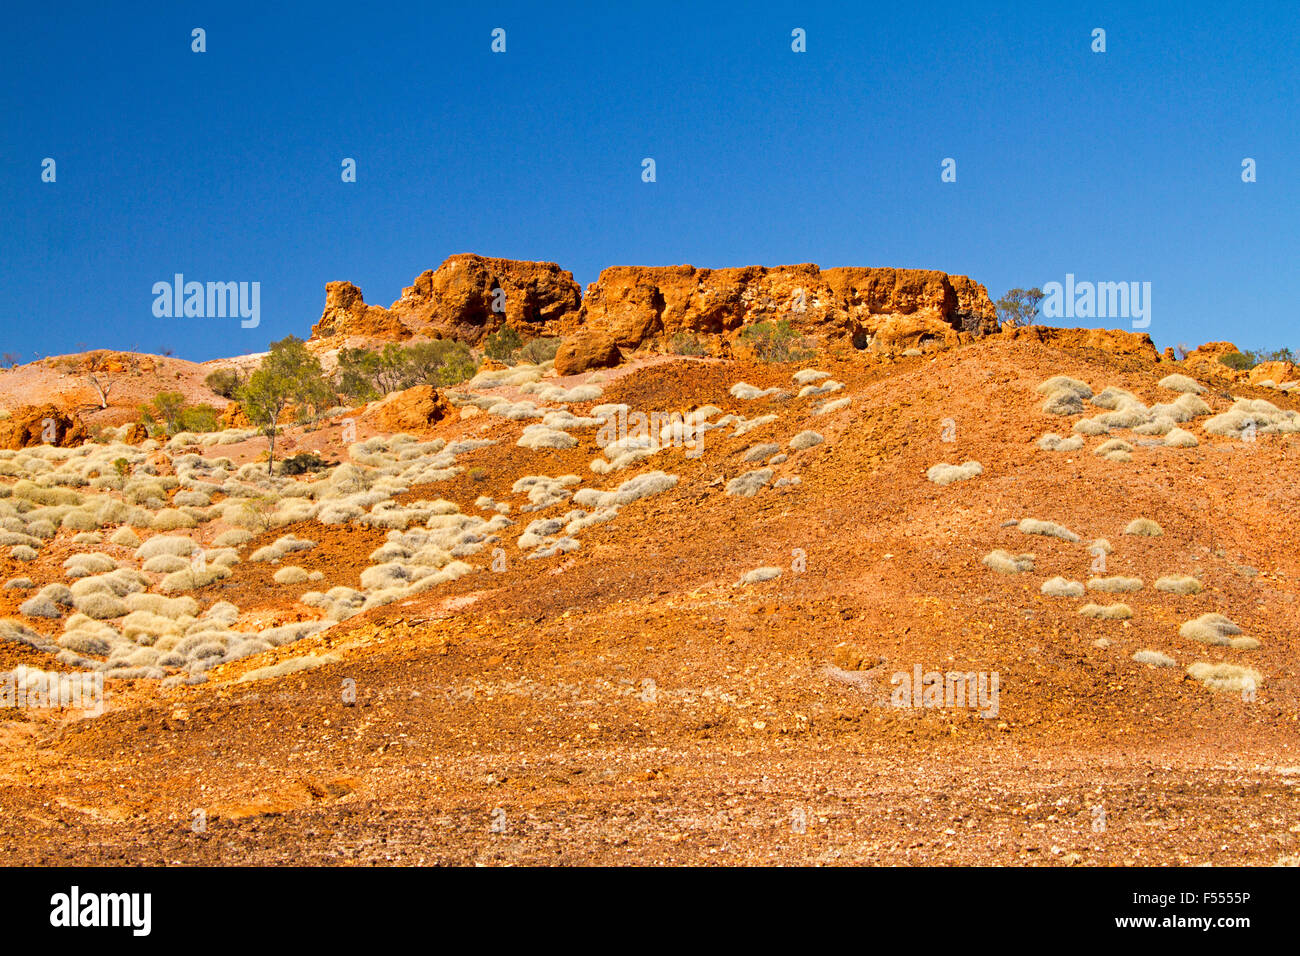 Australian outback landscape with rugged red rocky hill and barren slopes cloaked with spinifex grass under blue sky Stock Photo